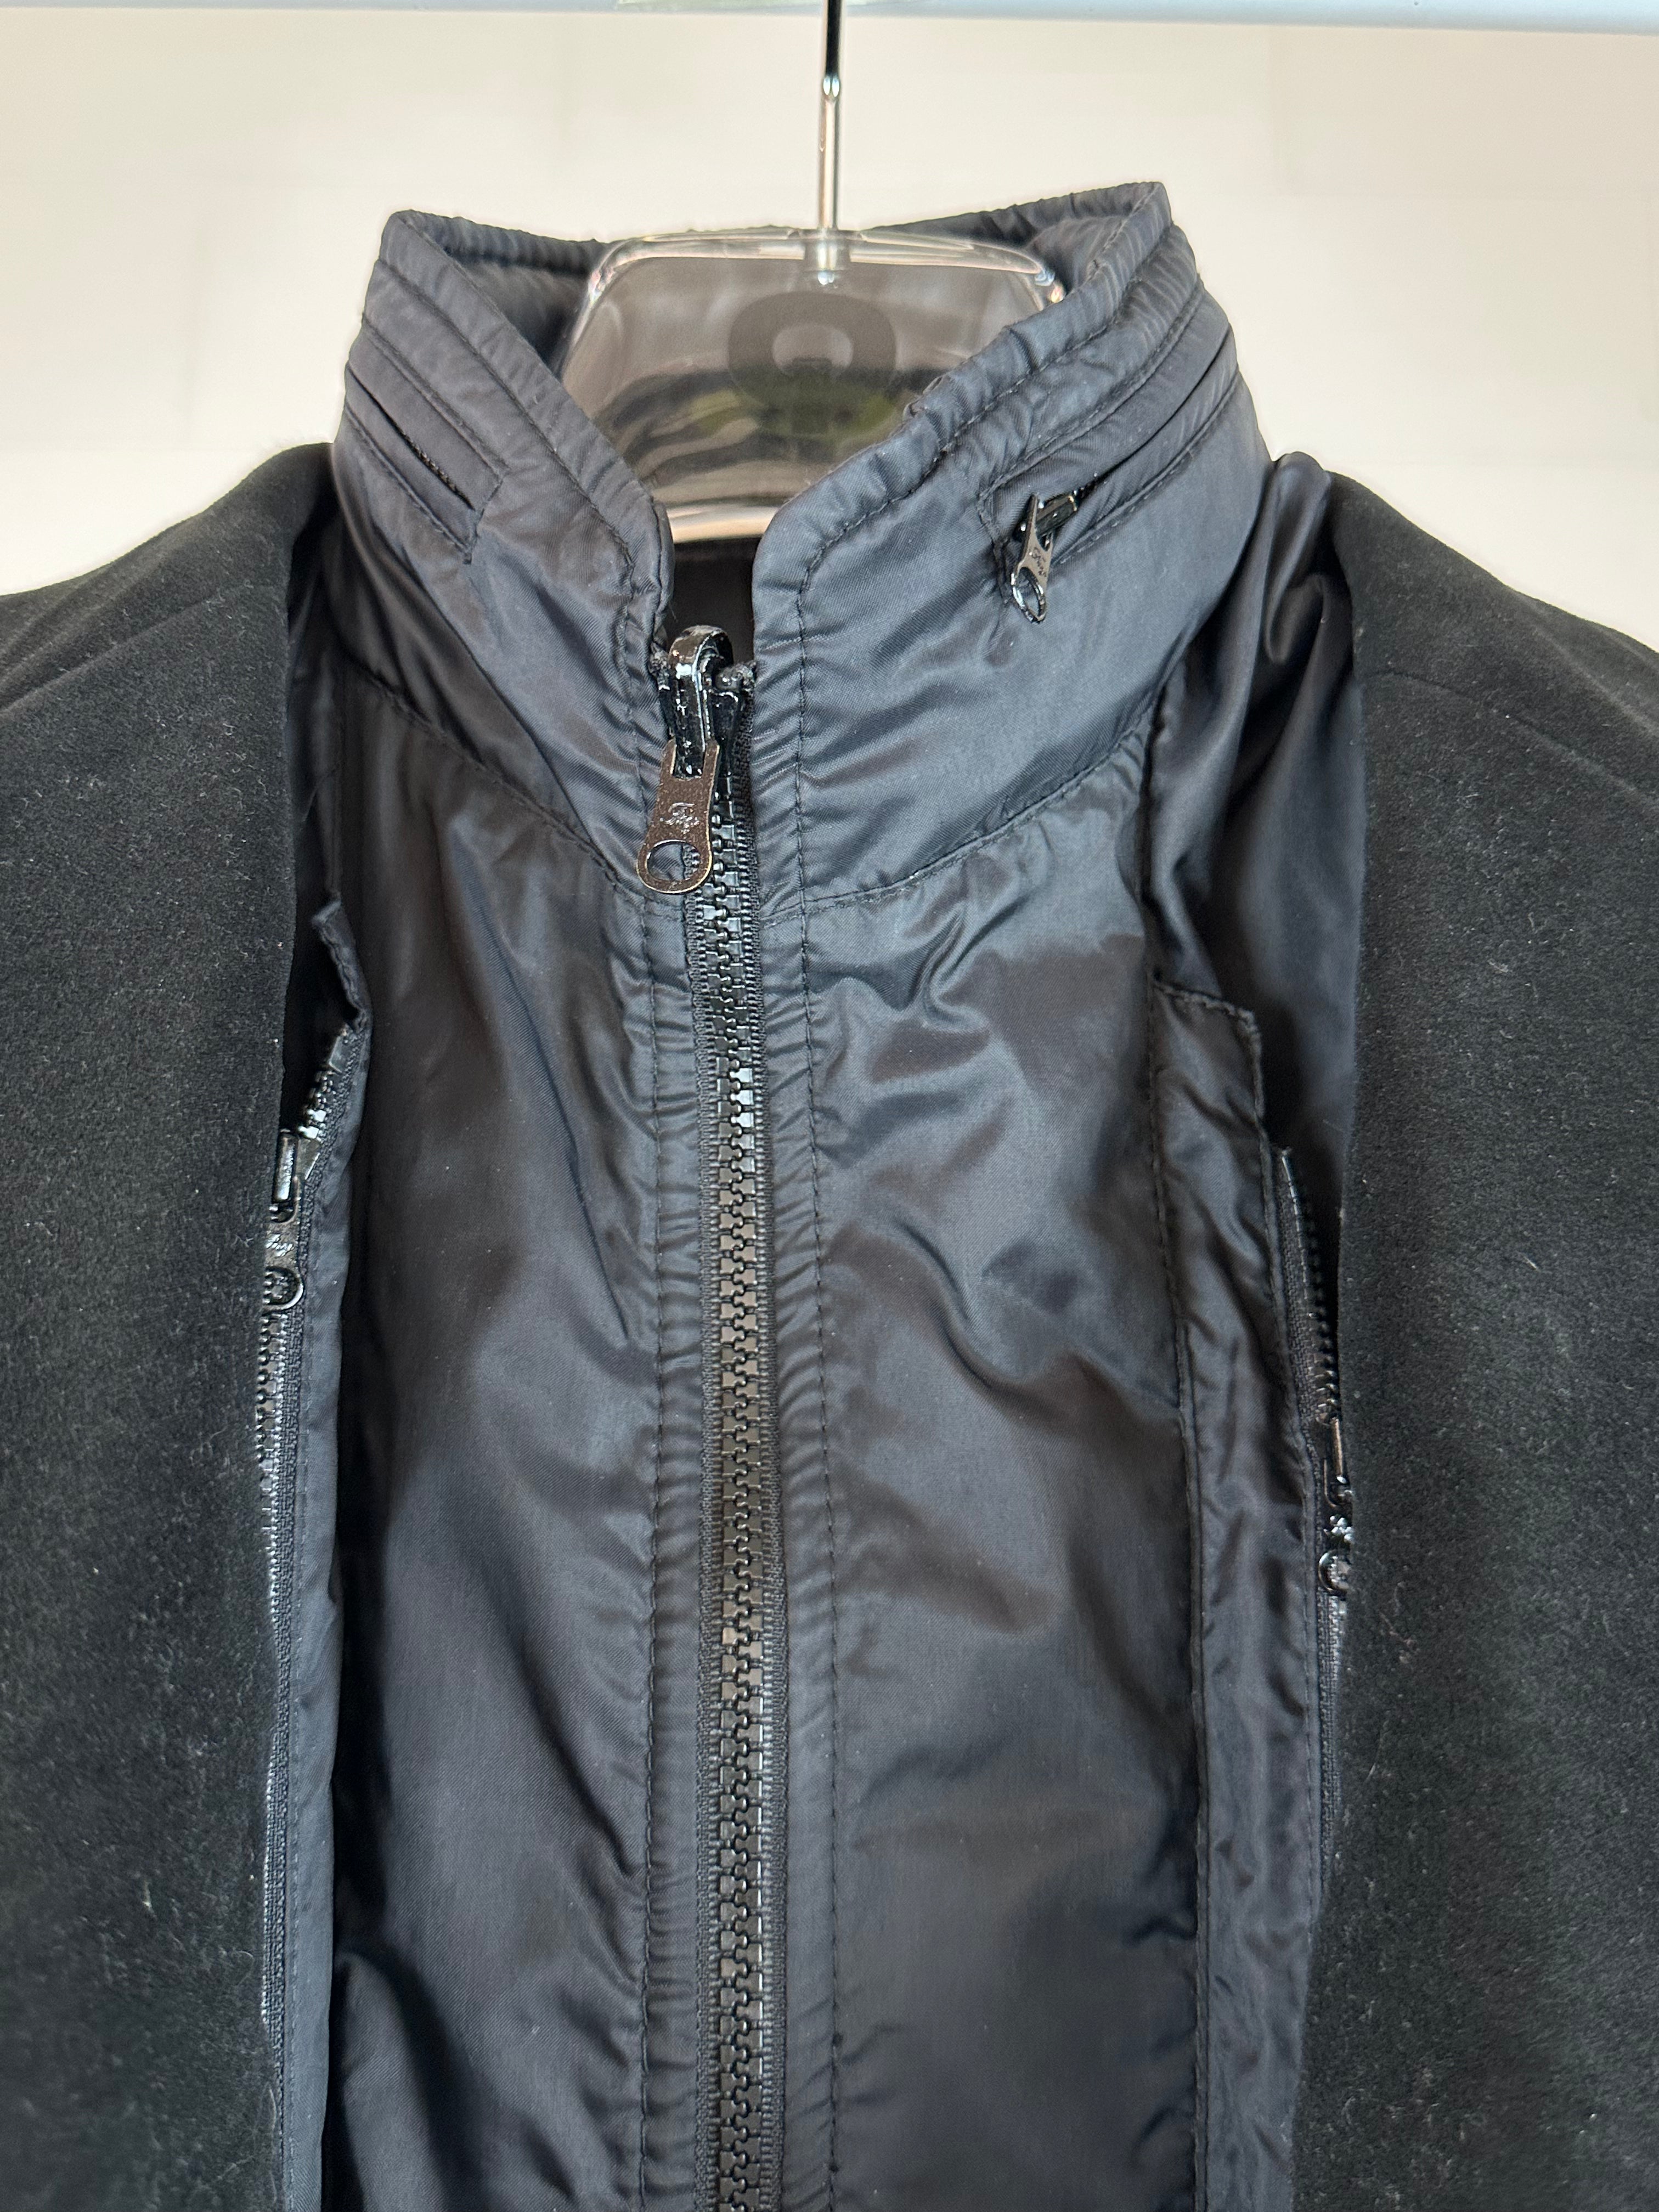 Coat With Incorporate Vest